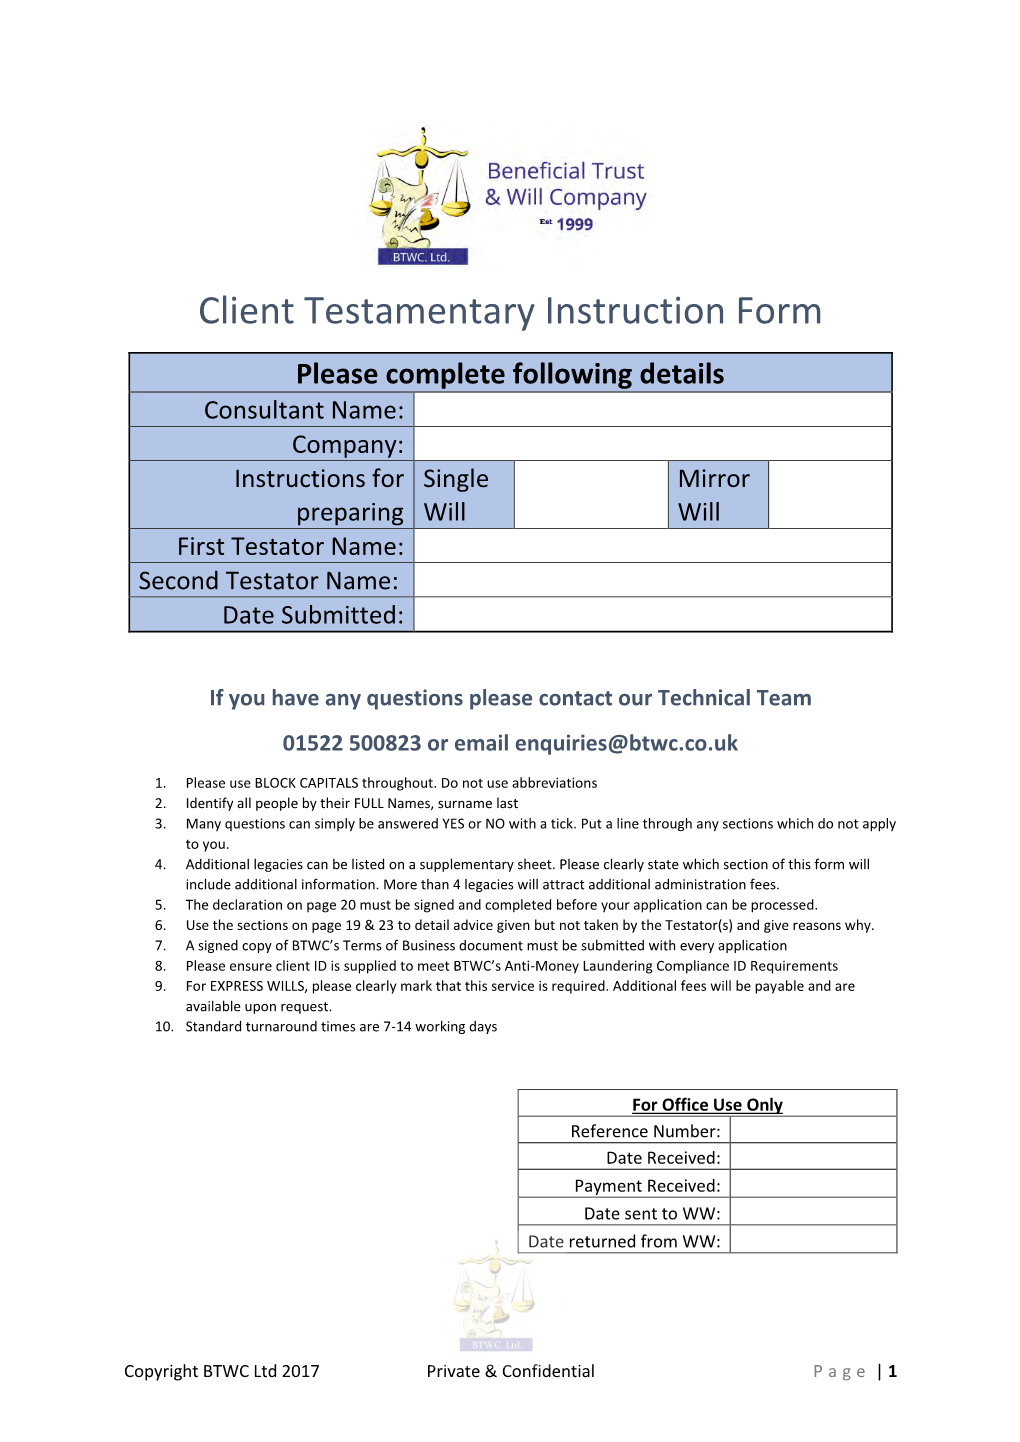 Client Testamentary Instruction Form